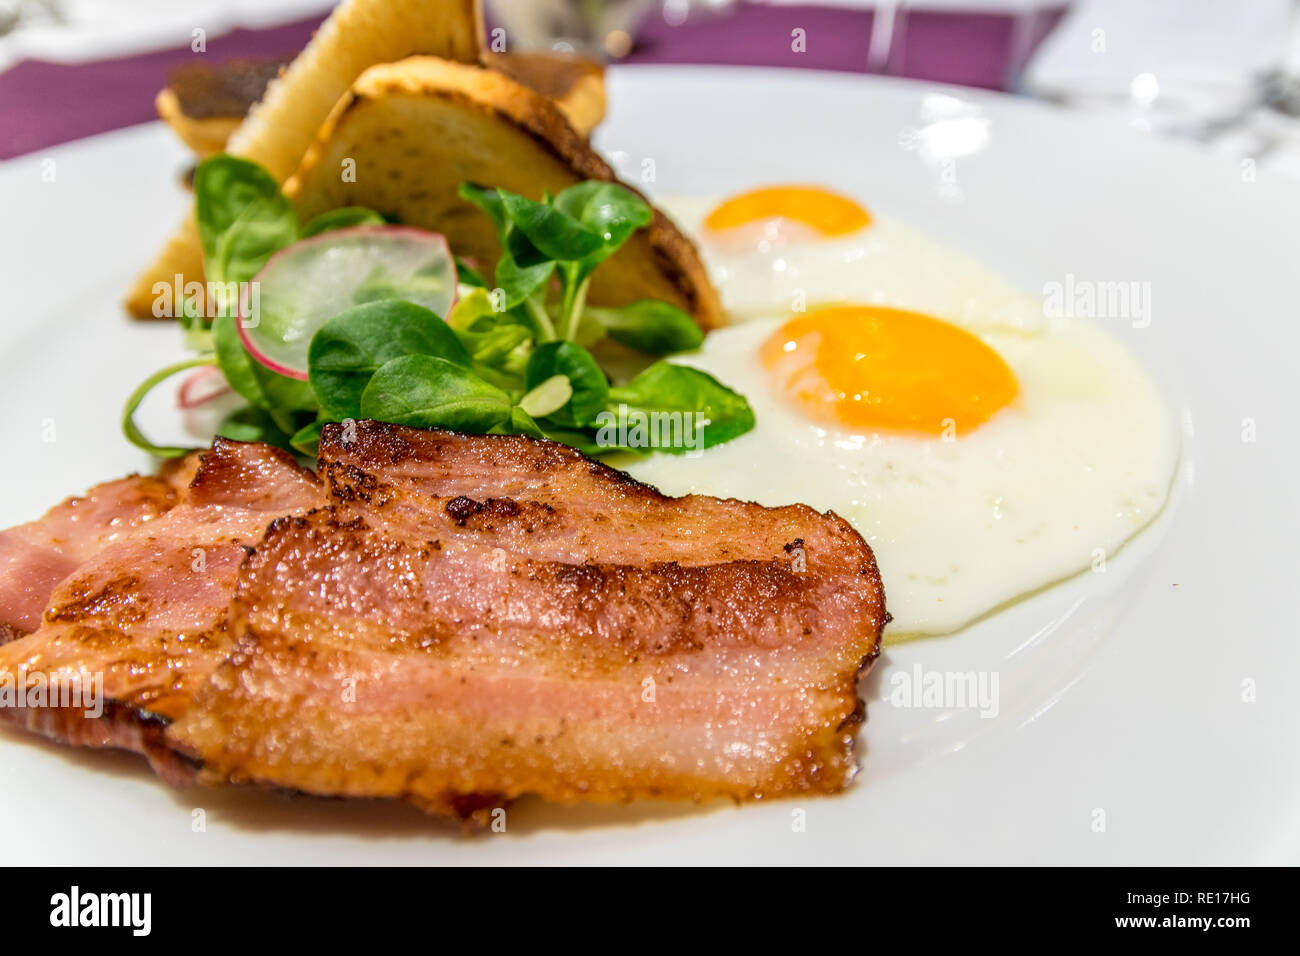 Bacon on an American breakfast plate with sunny side up eggs and french toast, close up and selective focus photo. Stock Photo